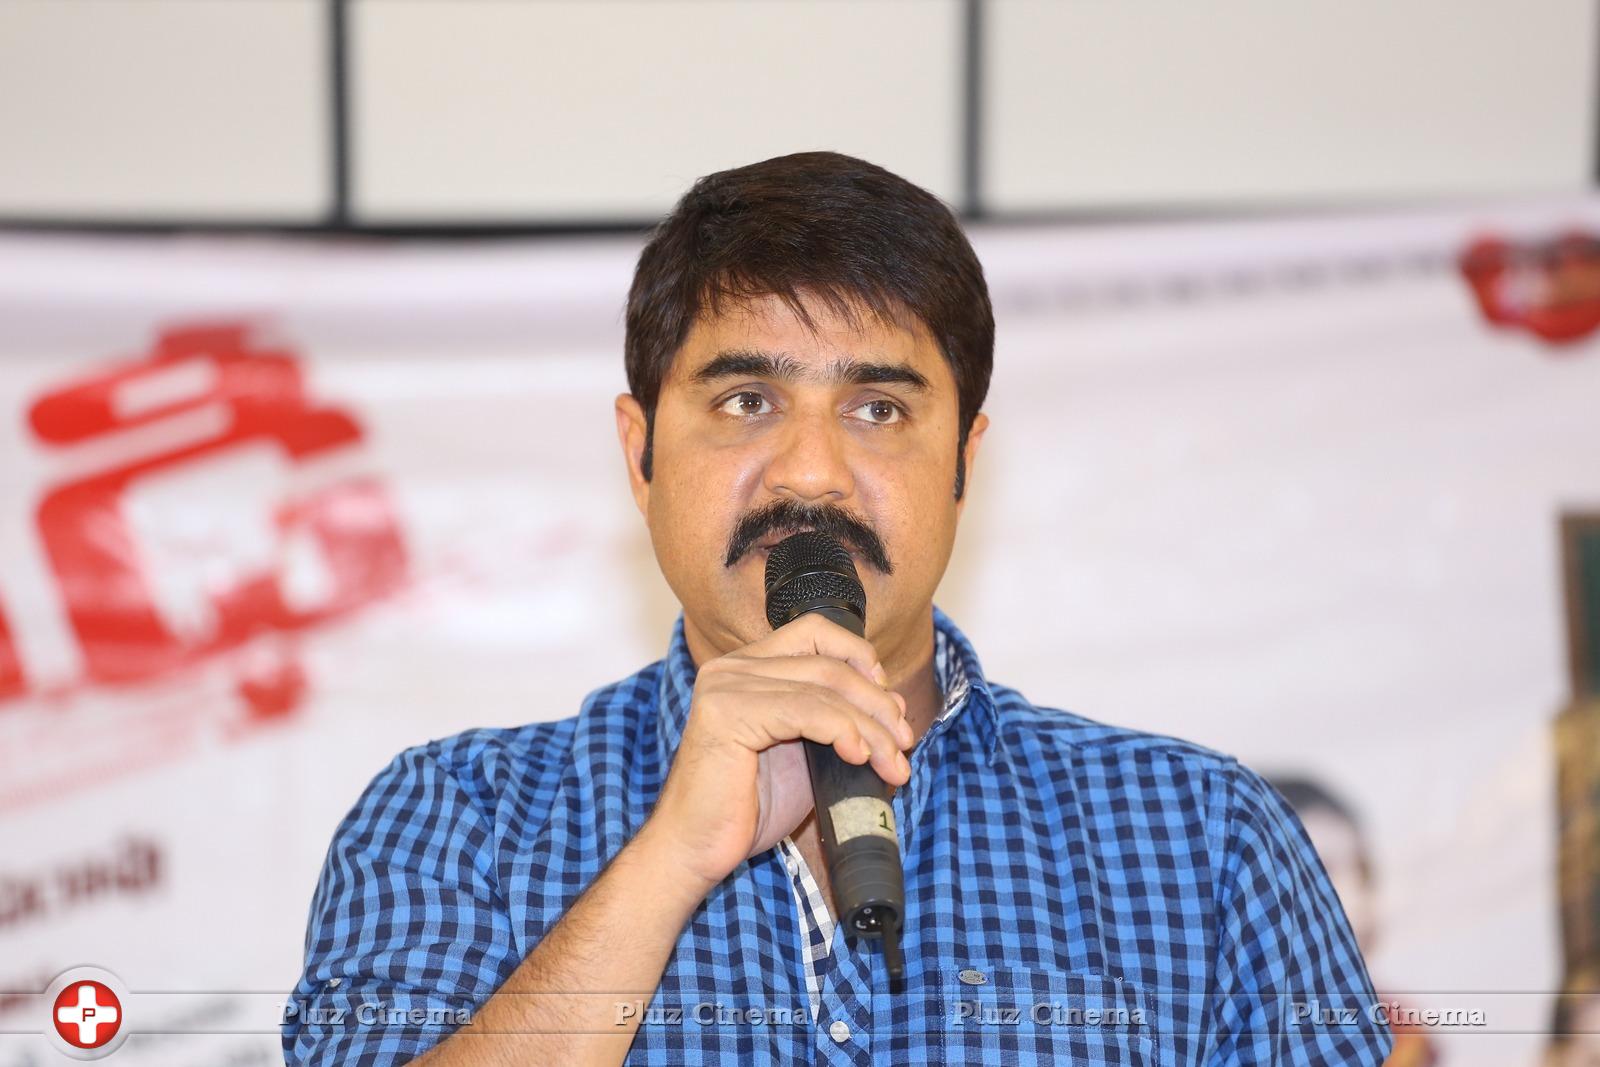 Srikanth Meka - Dhee Ante Dhee Movie Press Meet Photos | Picture 962075